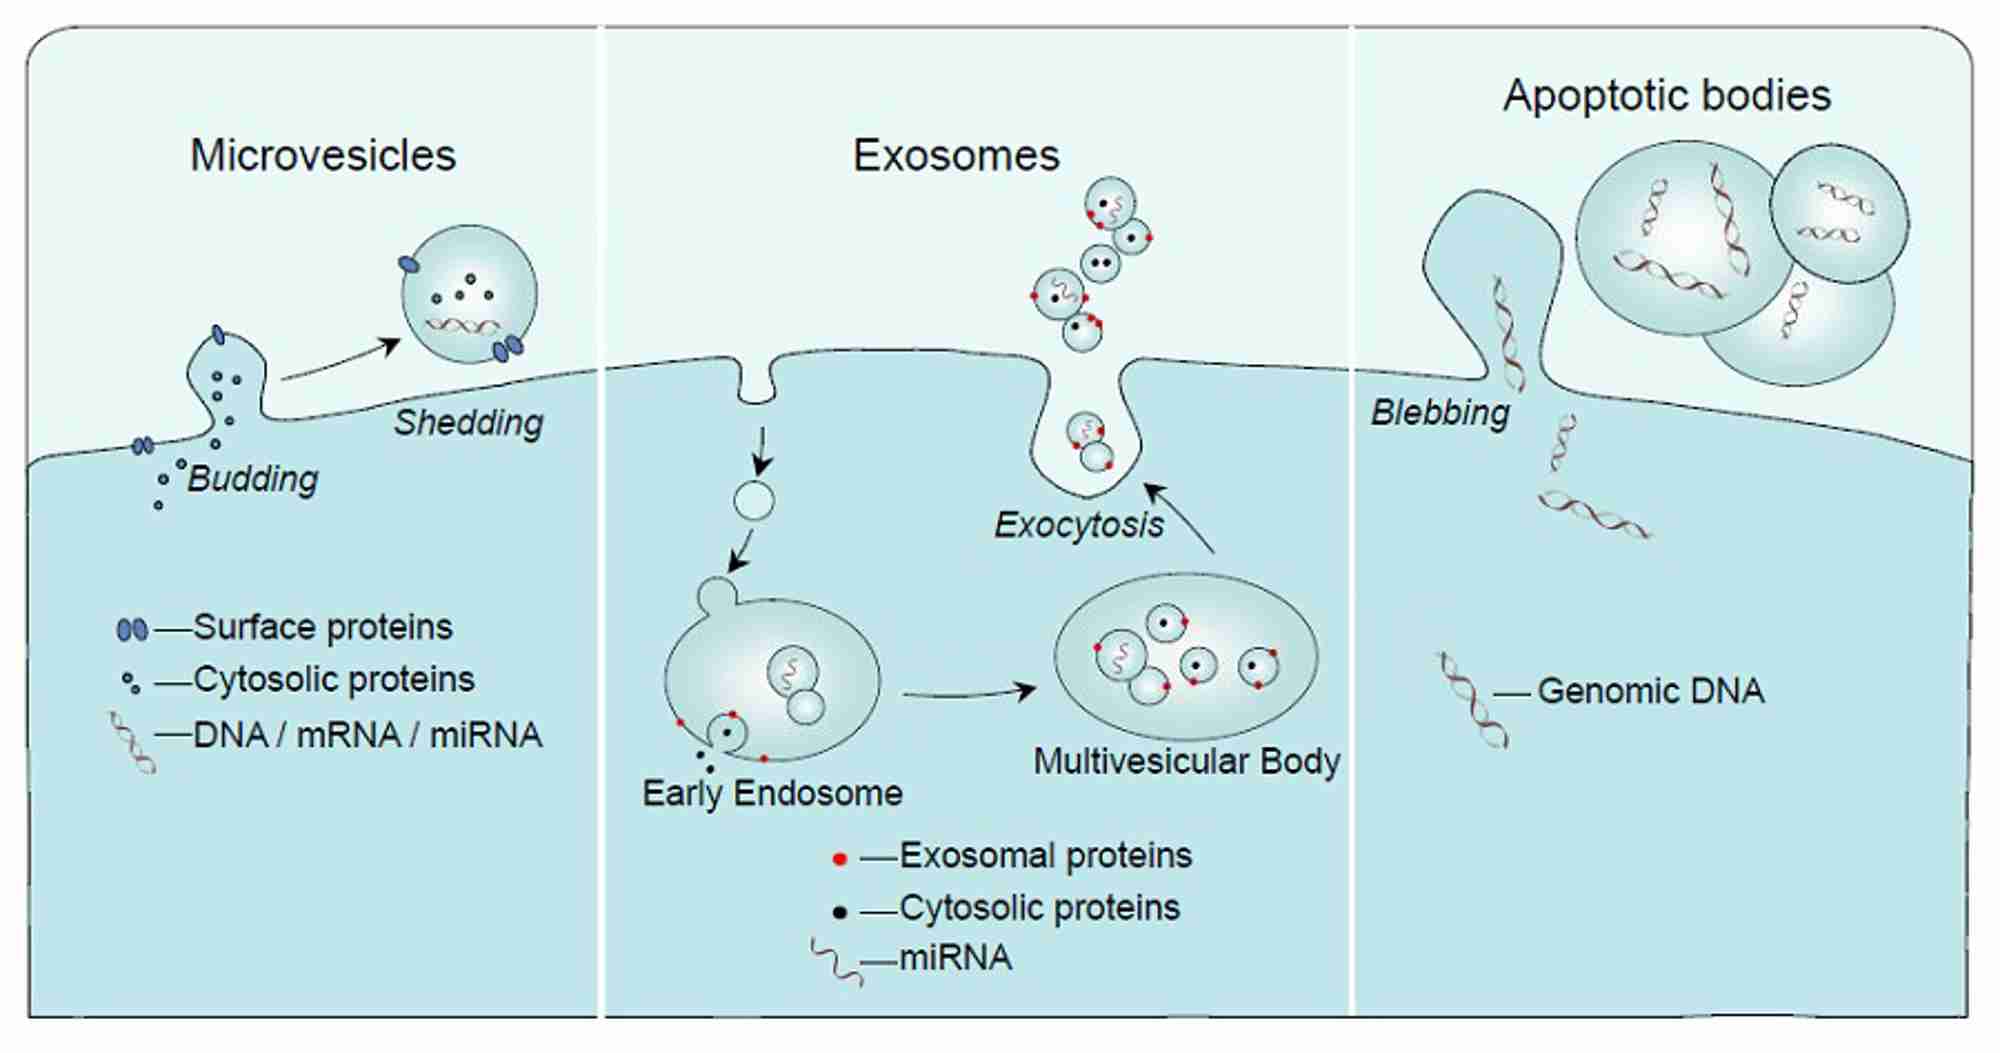 Schematic representation of the mechanisms of formation of microvesicles, exosomes and apoptotic bodies. Reproduced with permission from Journal of Endocrinology 228 R57-R71